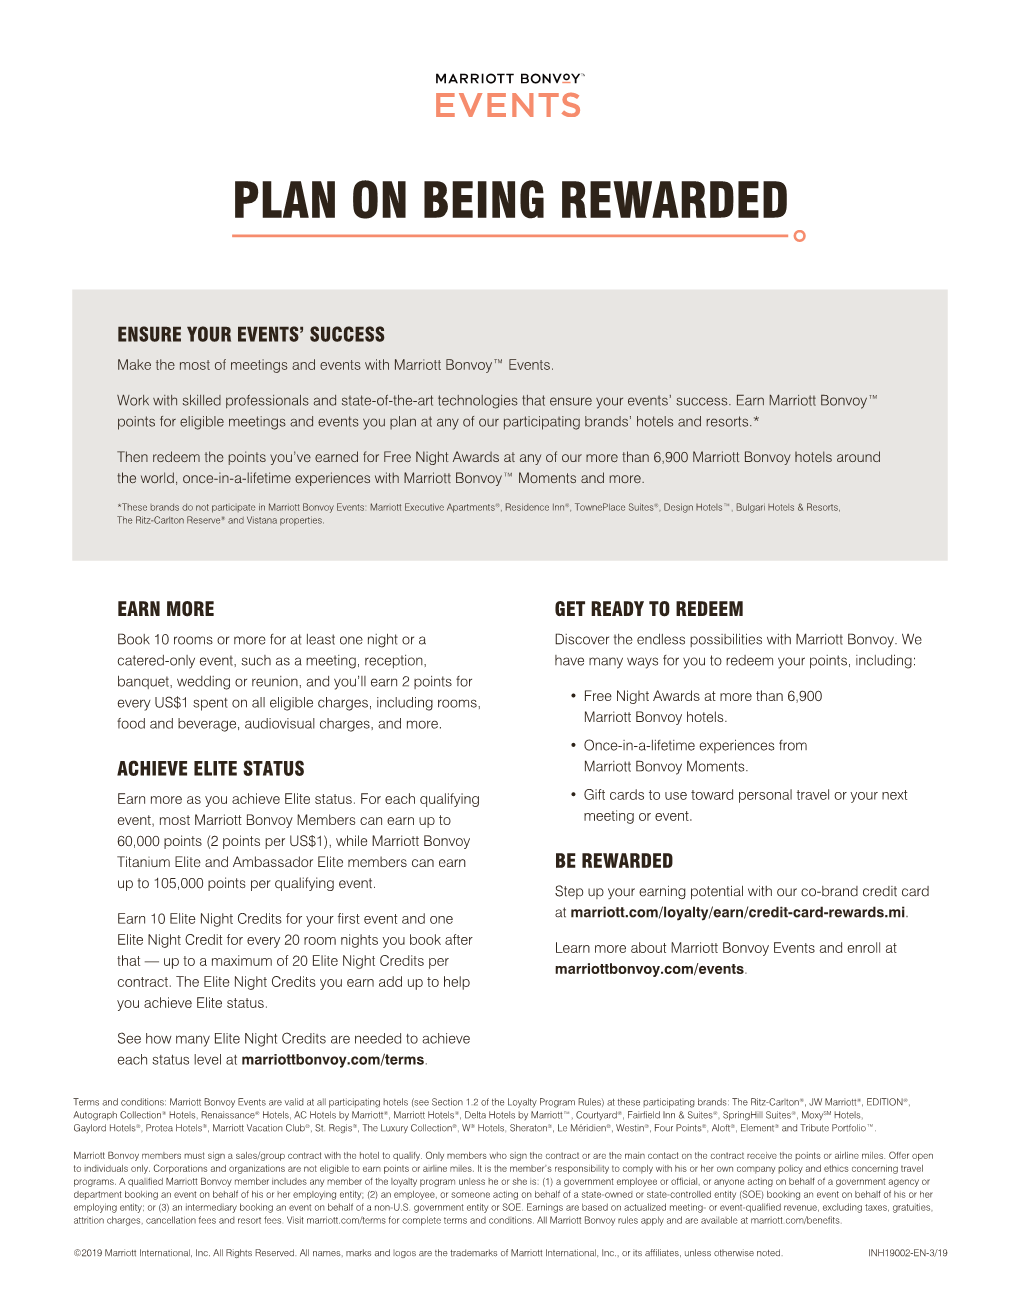 Marriott Bonvoy Events: Customer One-Page Flyer